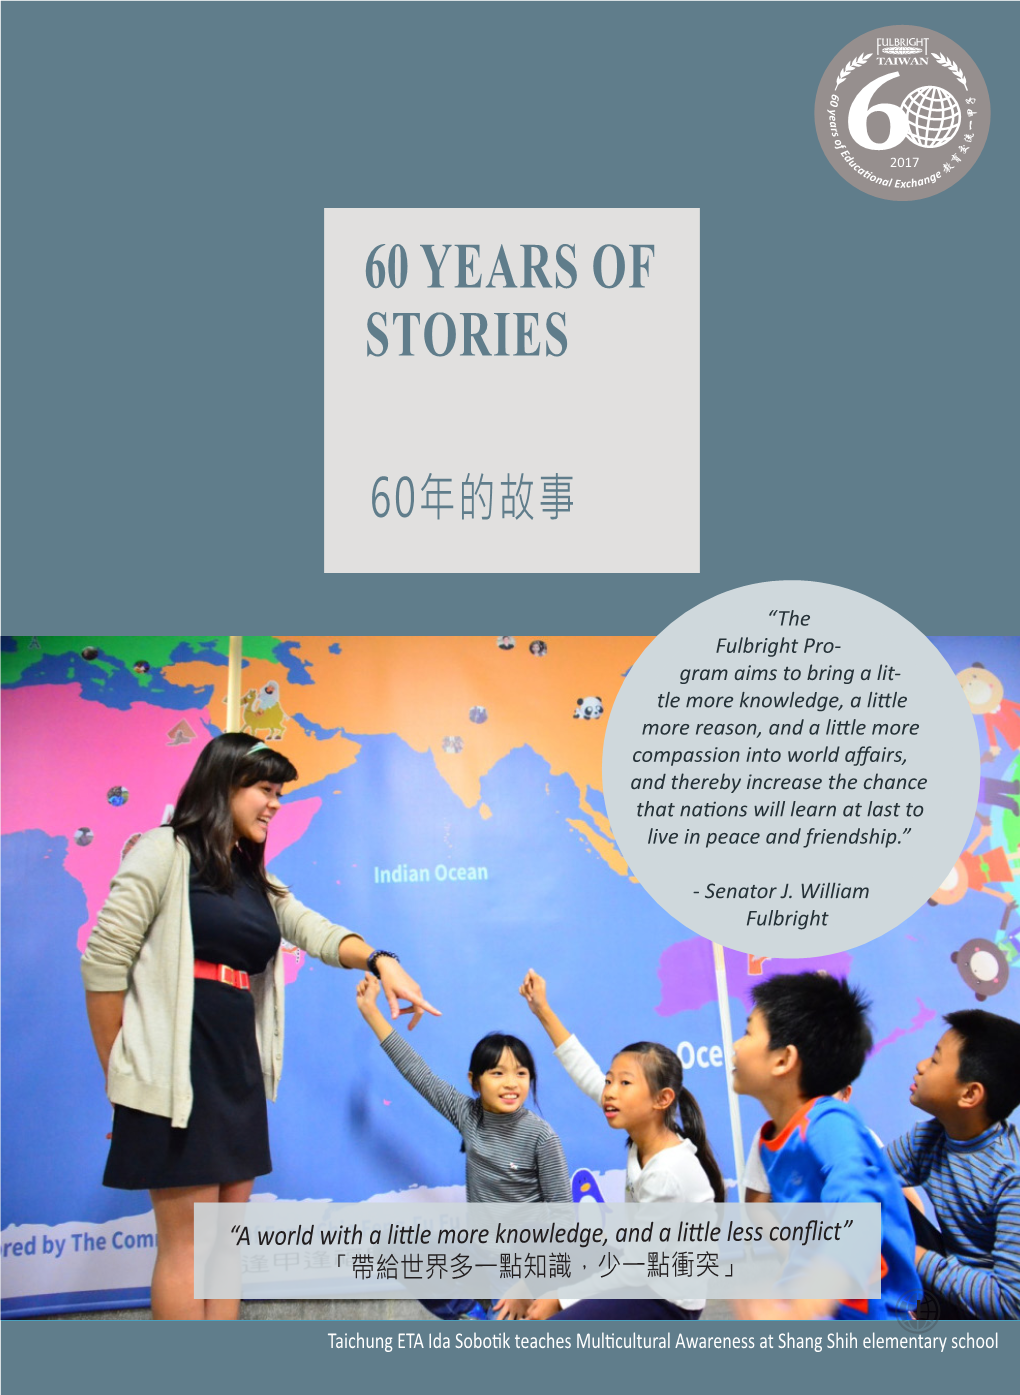 60 Years of Stories